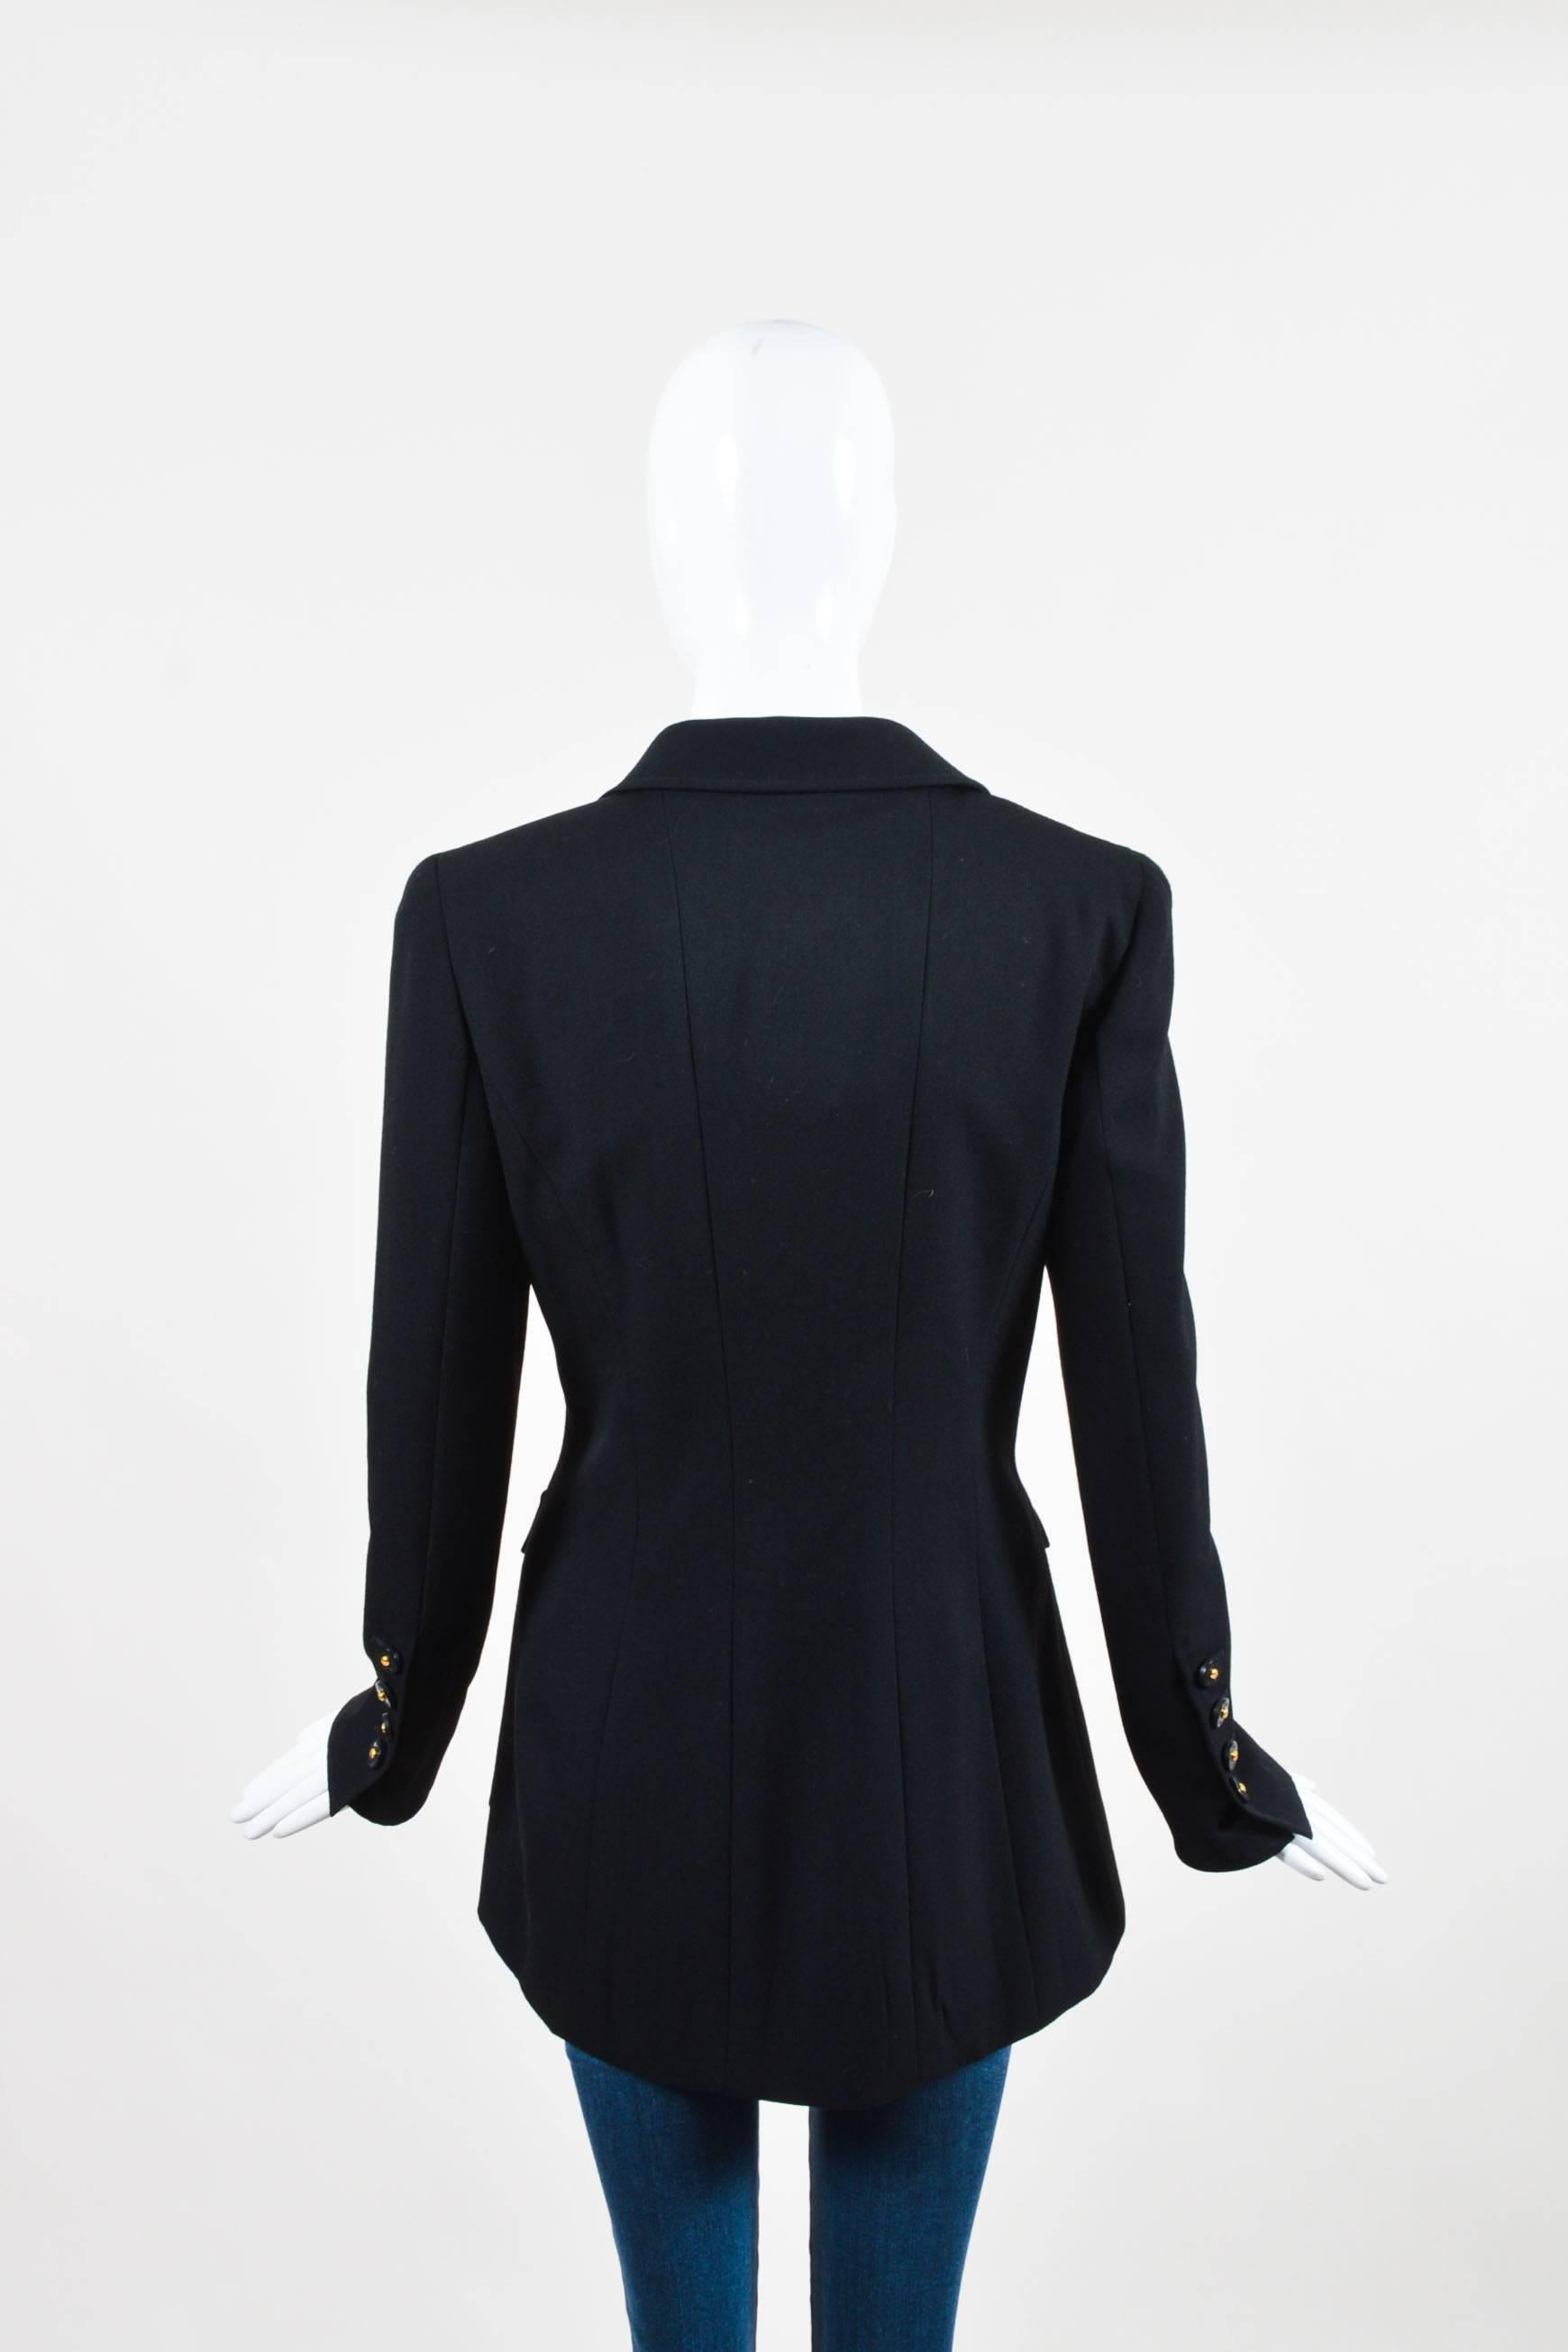 Chanel Boutique 1997 Spring Collection Black Wool LS Blazer Jacket Size 42 In Good Condition For Sale In Chicago, IL